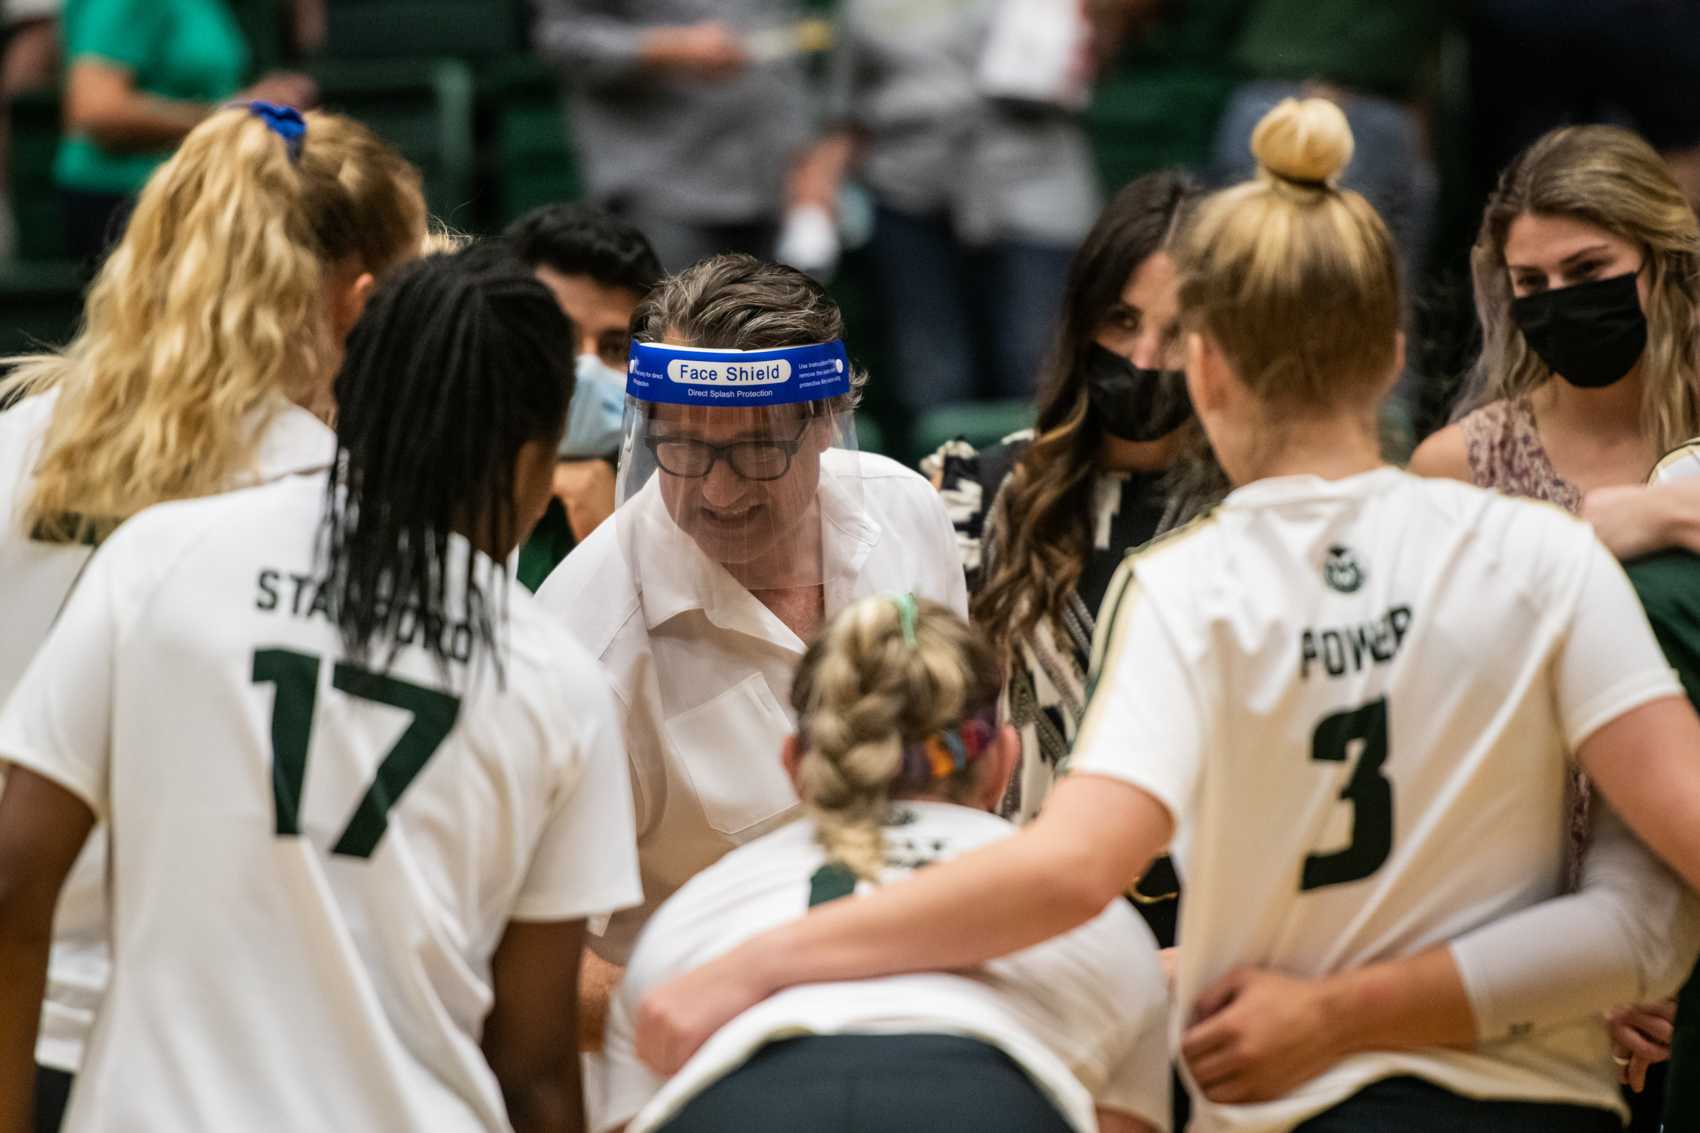 After the Colorado State University Rams won the third match against the University of Wyoming Cowgirls 25-22, Head Coach Tom Hilbert talks to the team huddle